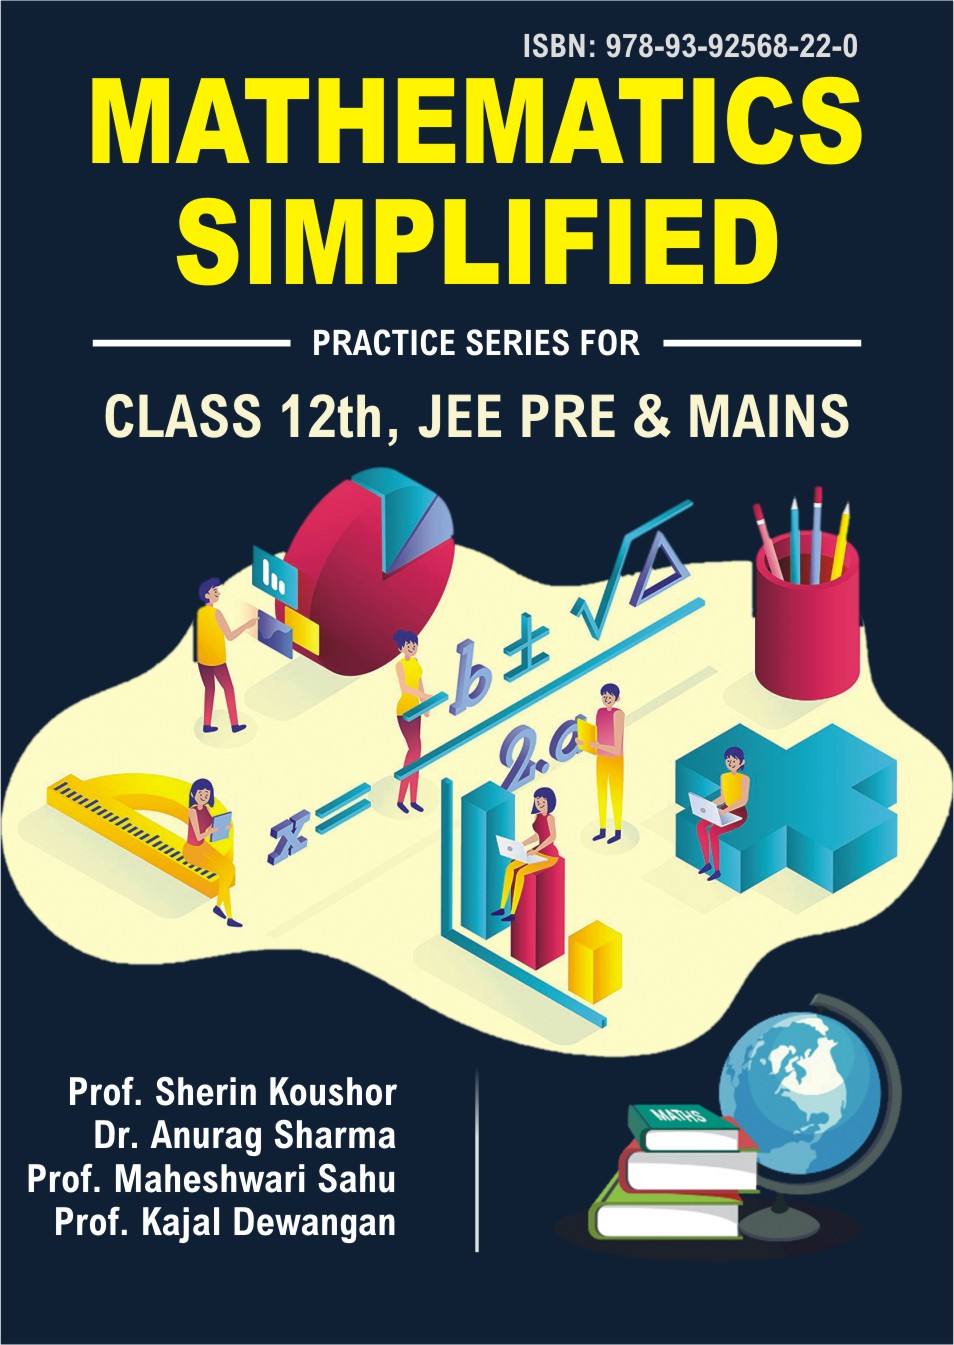 Mathematics Simplified - Practice Series for Class 12th, JEE Pre and Mains